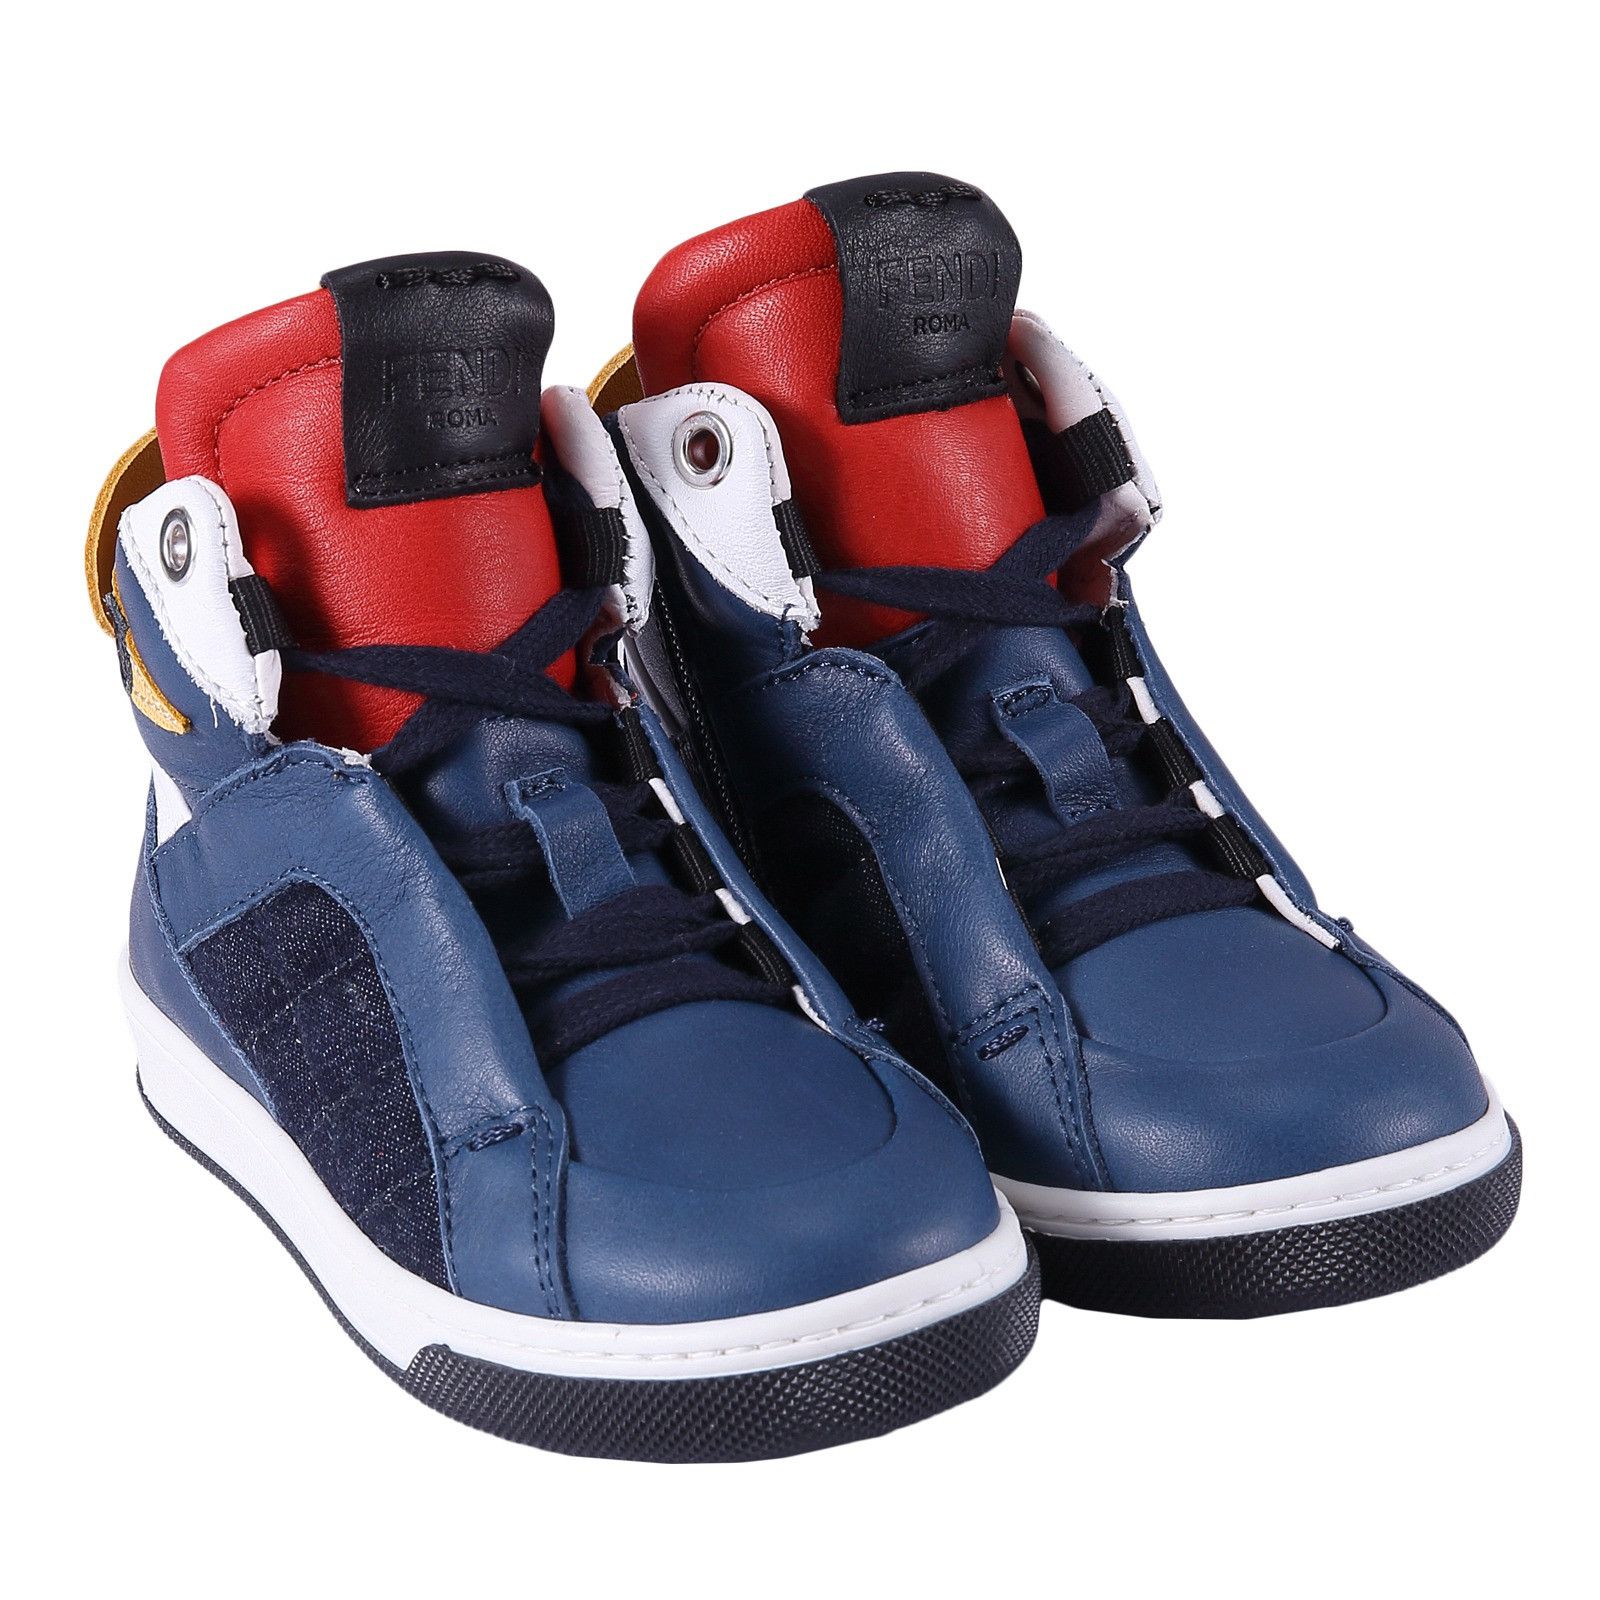 Boys Blue 'Monster' Leather High-Top Trainers - CÉMAROSE | Children's Fashion Store - 2